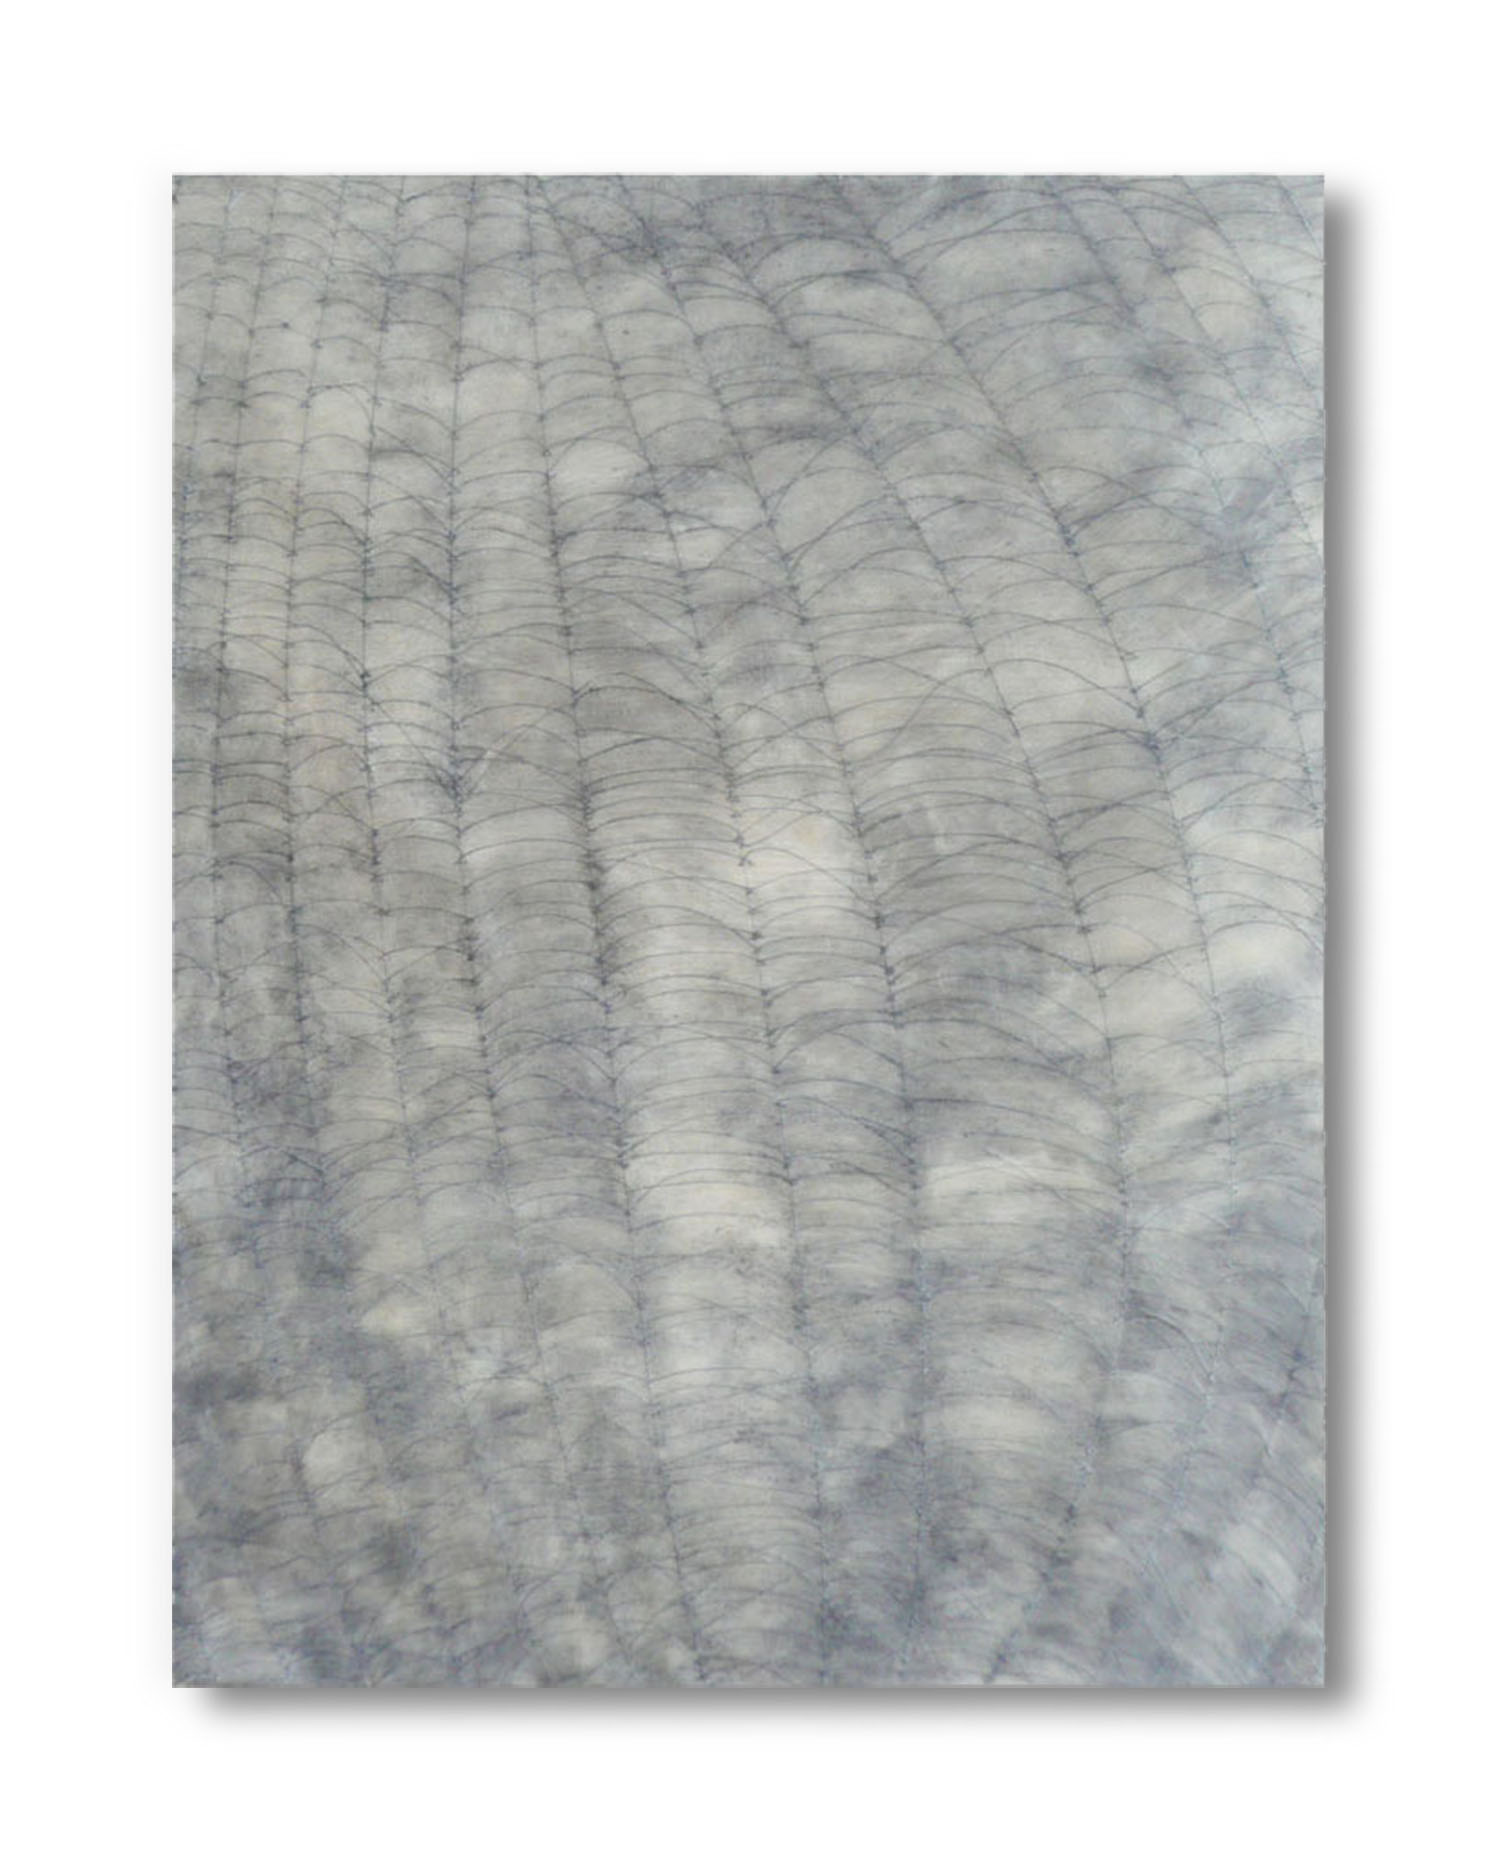  Line Weave, 2013 (sold) Encaustic, Oil 20 x 16 inches  